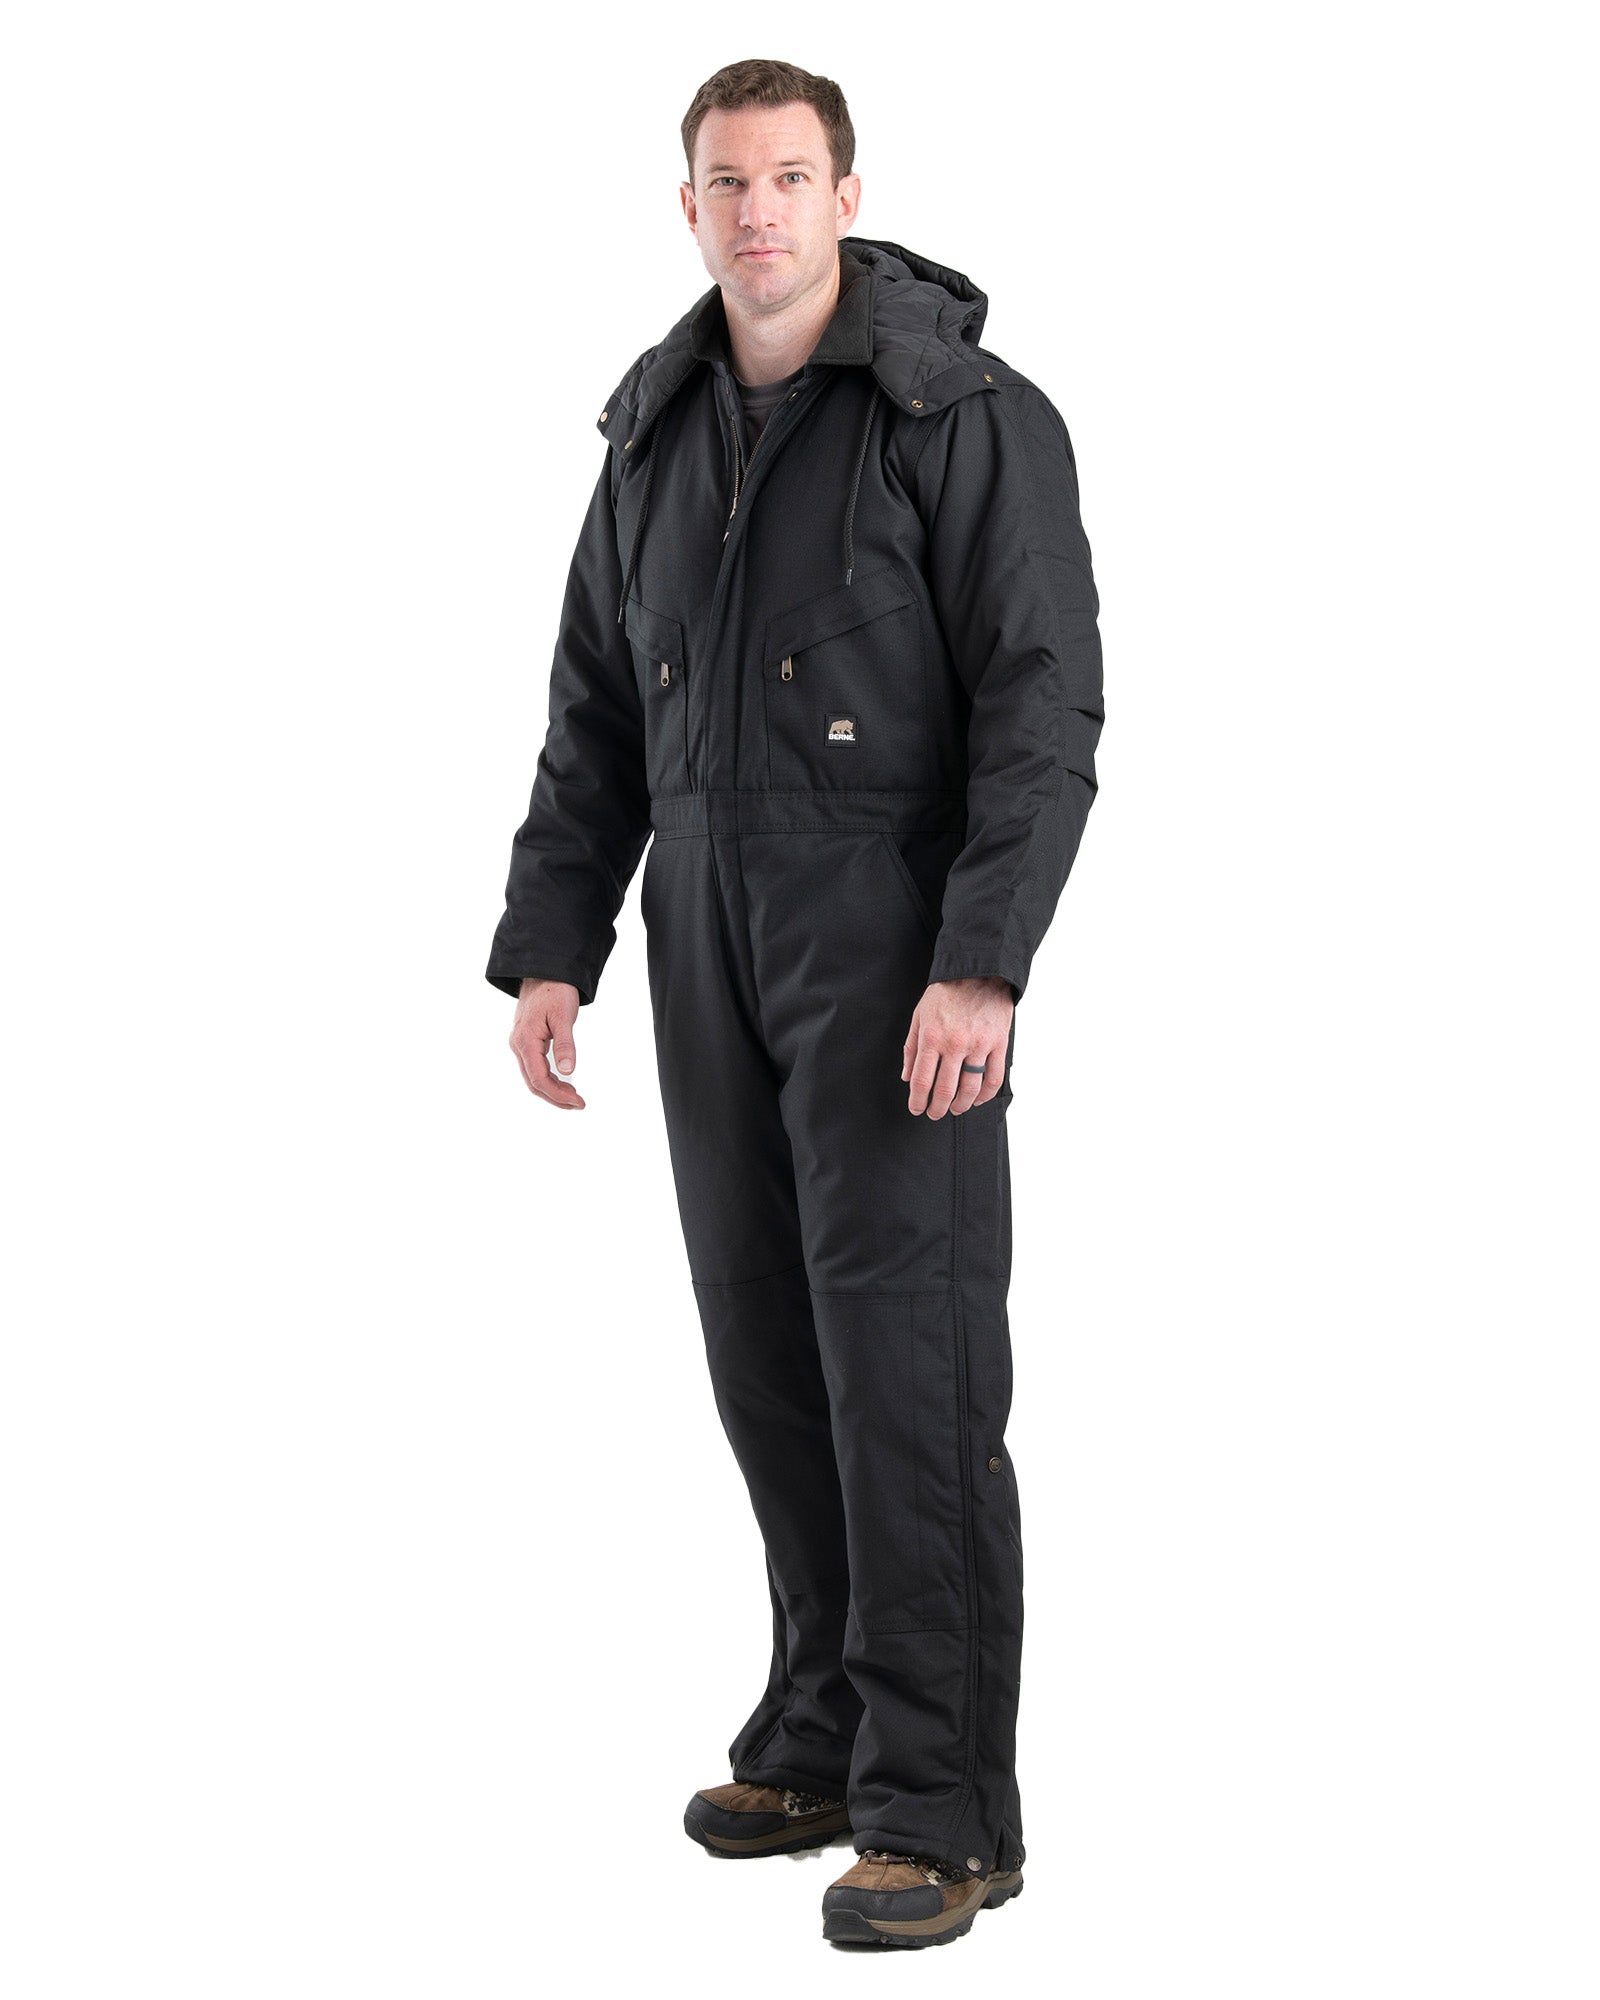 NI417BK Icecap Insulated Coverall